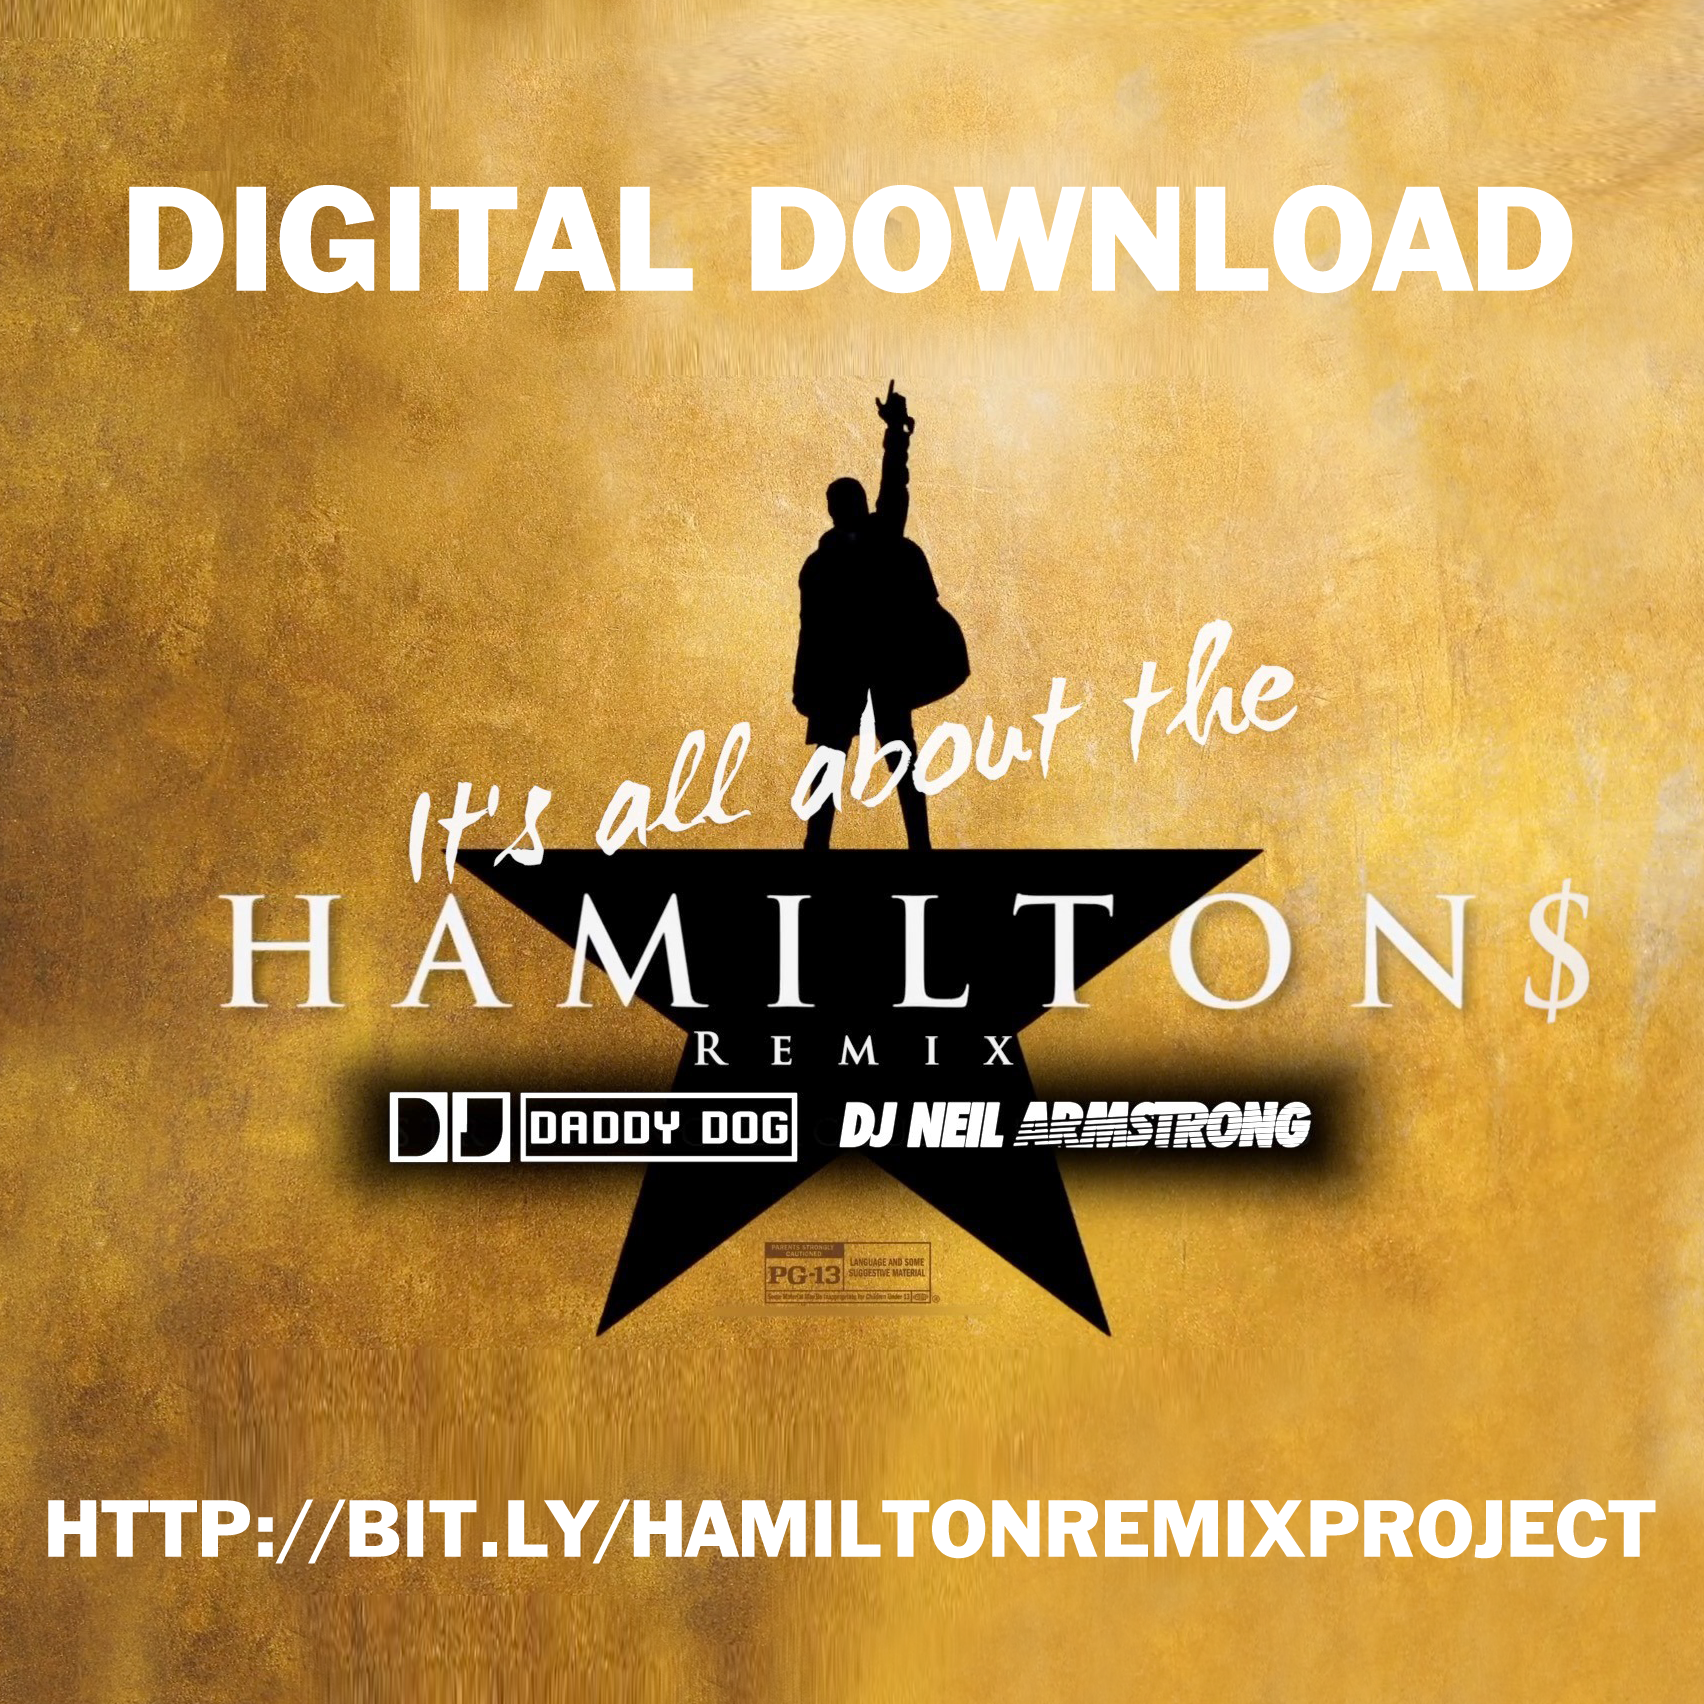 It's All About the HAMILTON$ Visual Remix Download